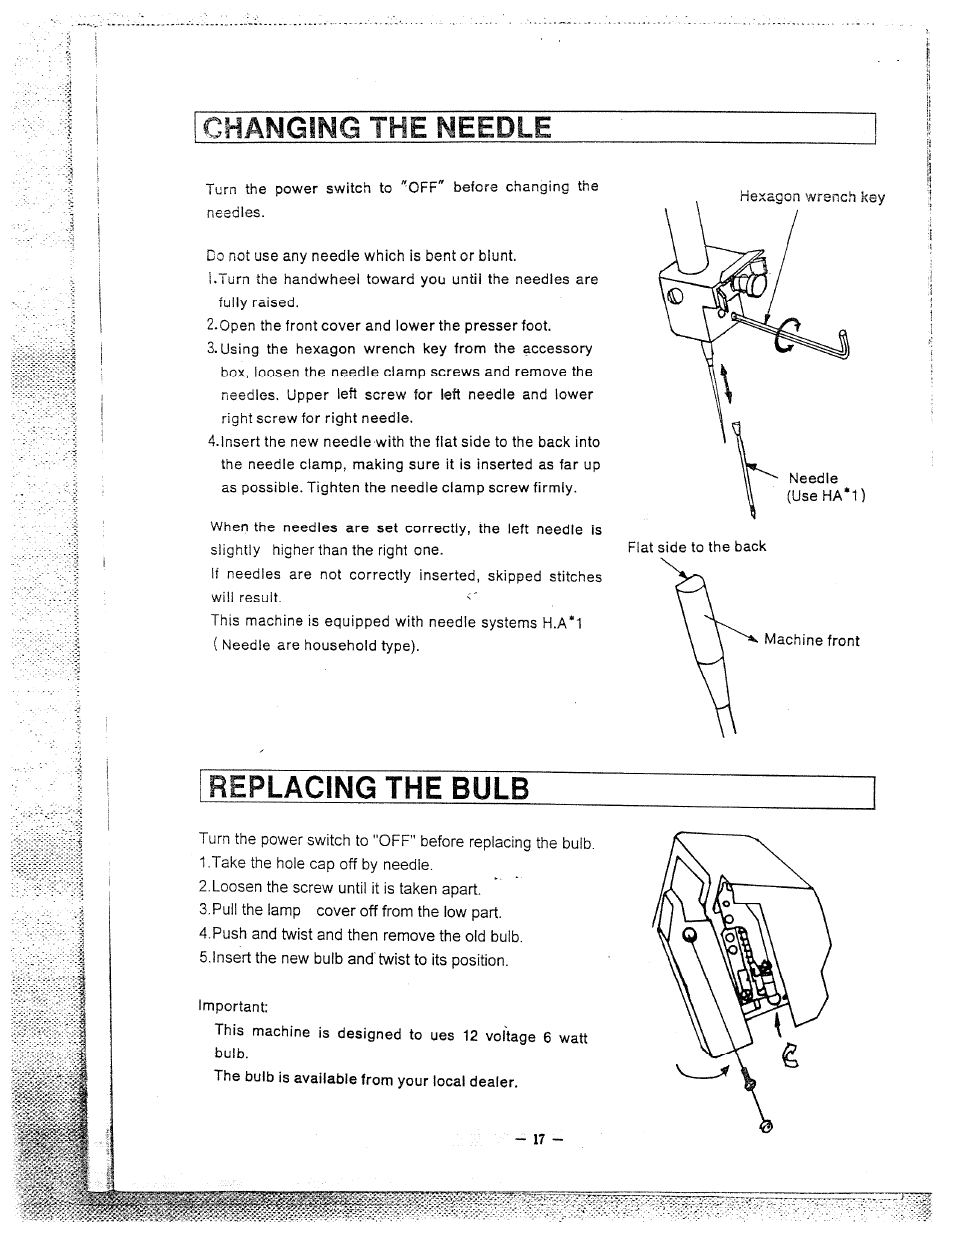 Changing the needle, Replacing the bulb | SINGER W1600 User Manual | Page 18 / 28